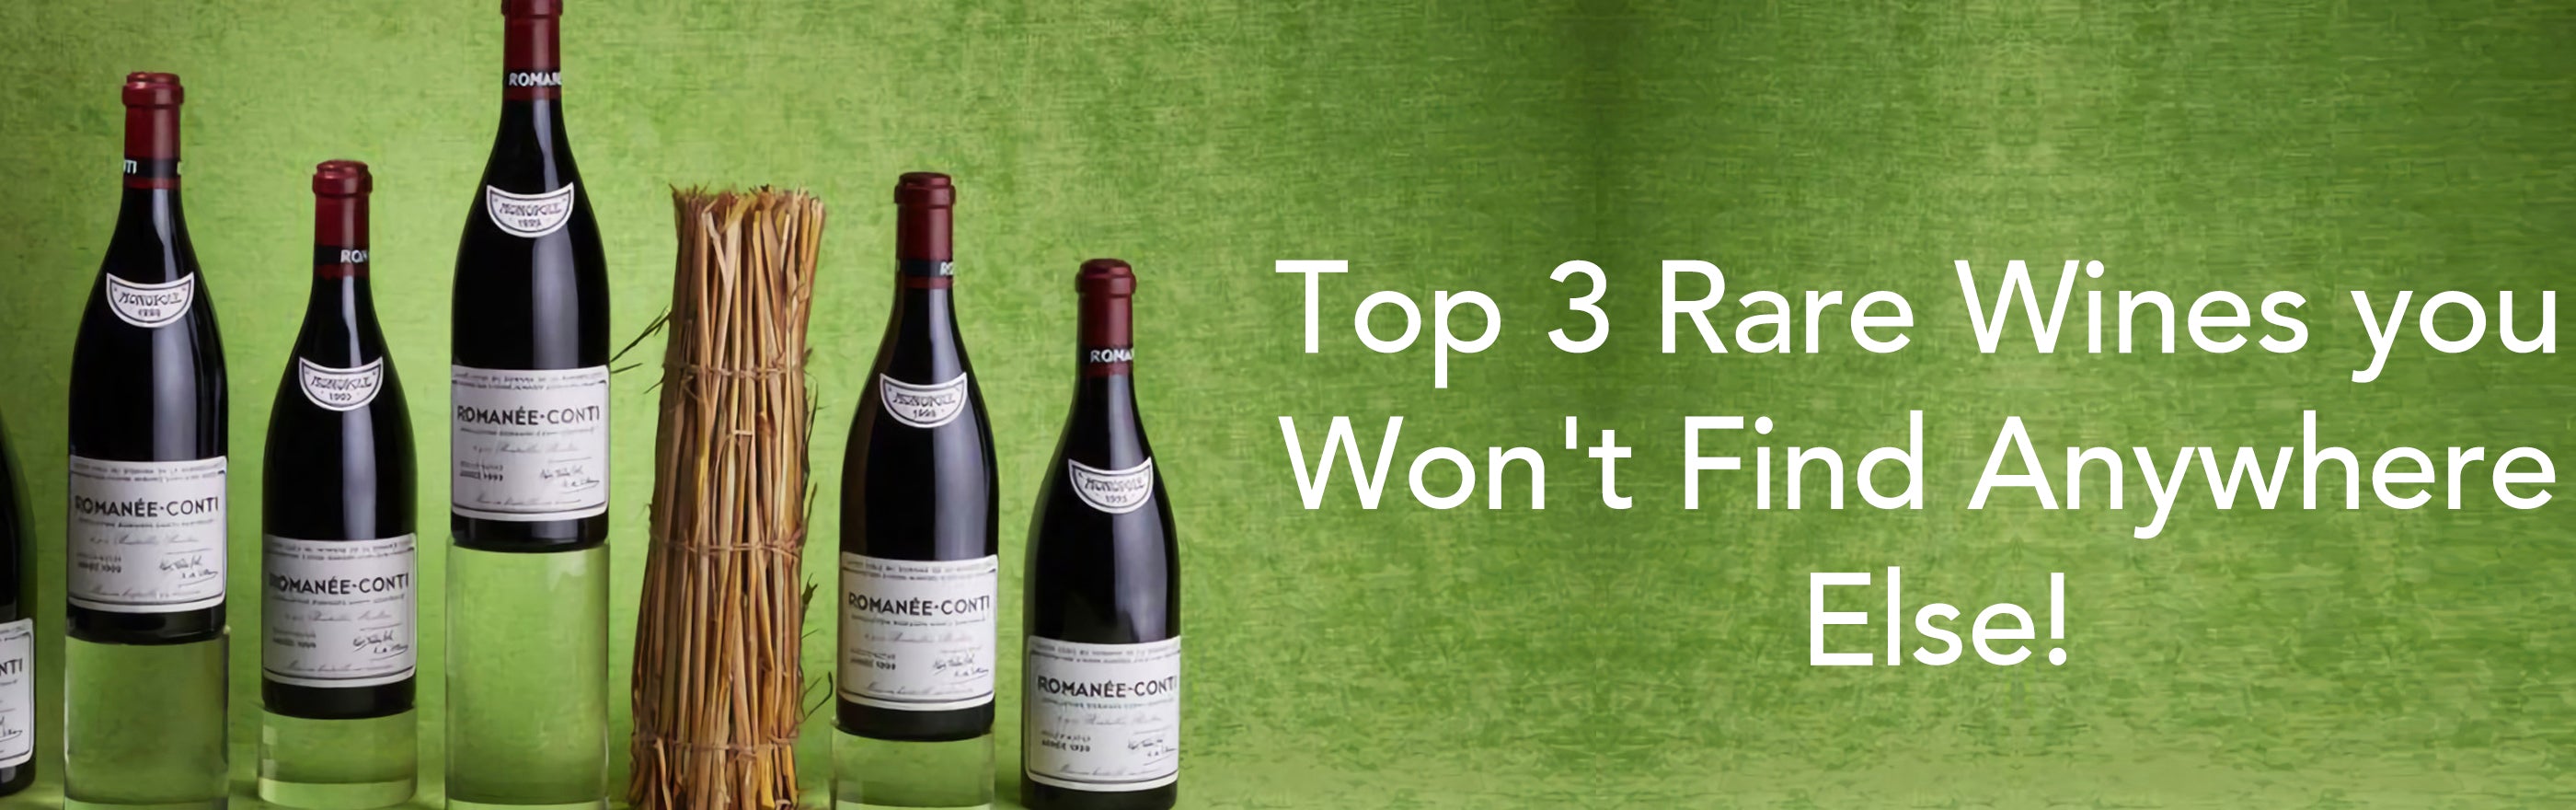 Great wines, rare vintages and top wine –